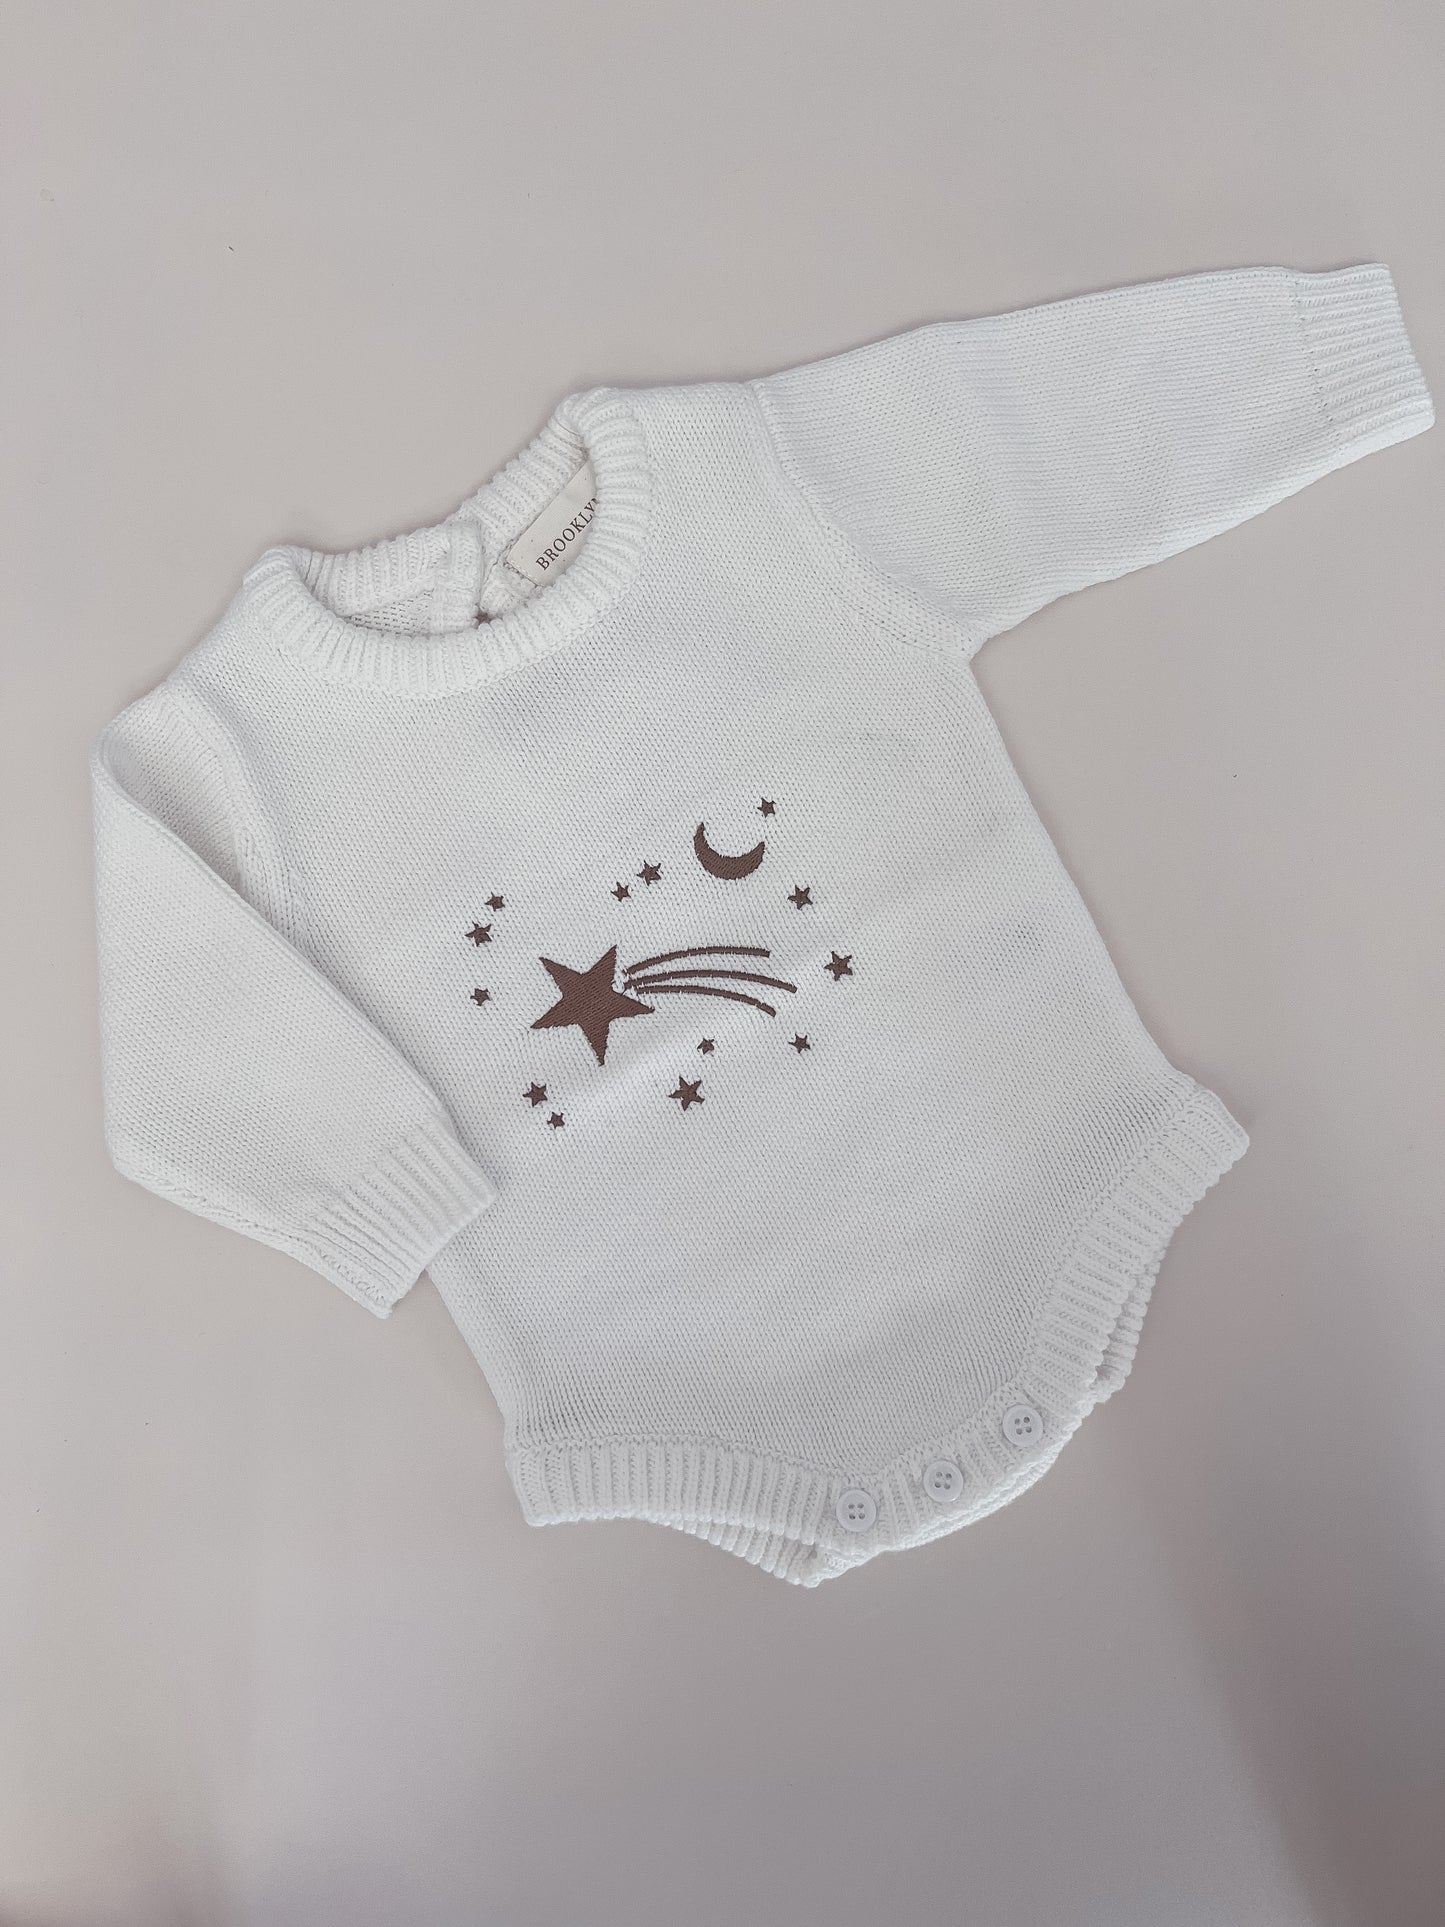 Shooting Star Knit Romper - Espresso Embroidery